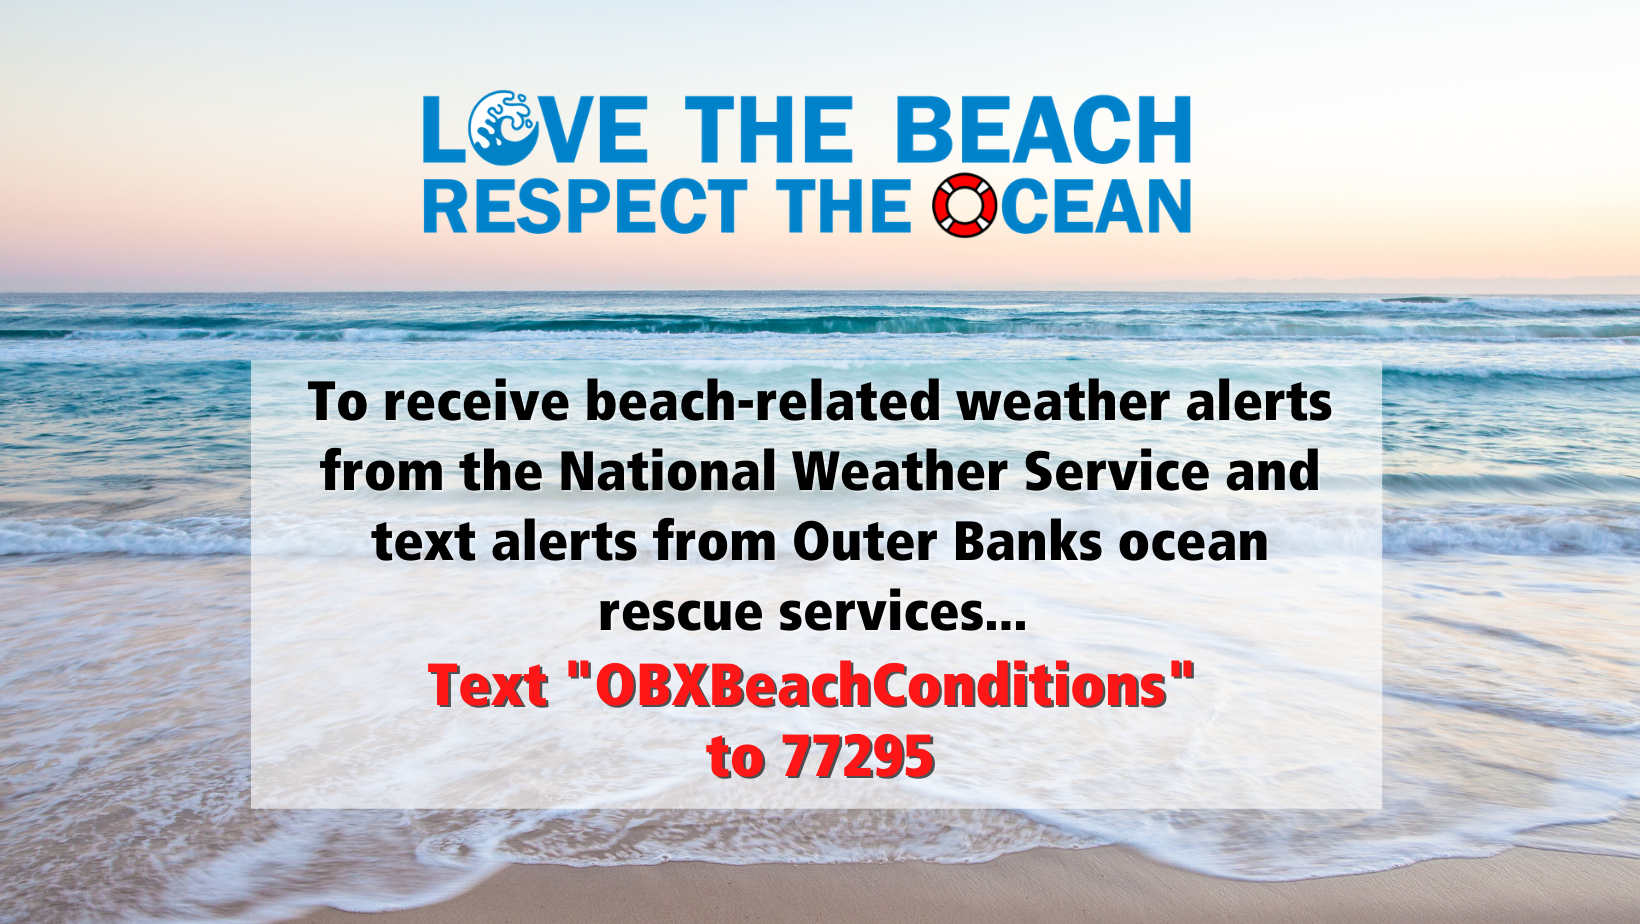 Text "OBXBeachConditions" to 77295 to receive beach alerts for Outer Banks